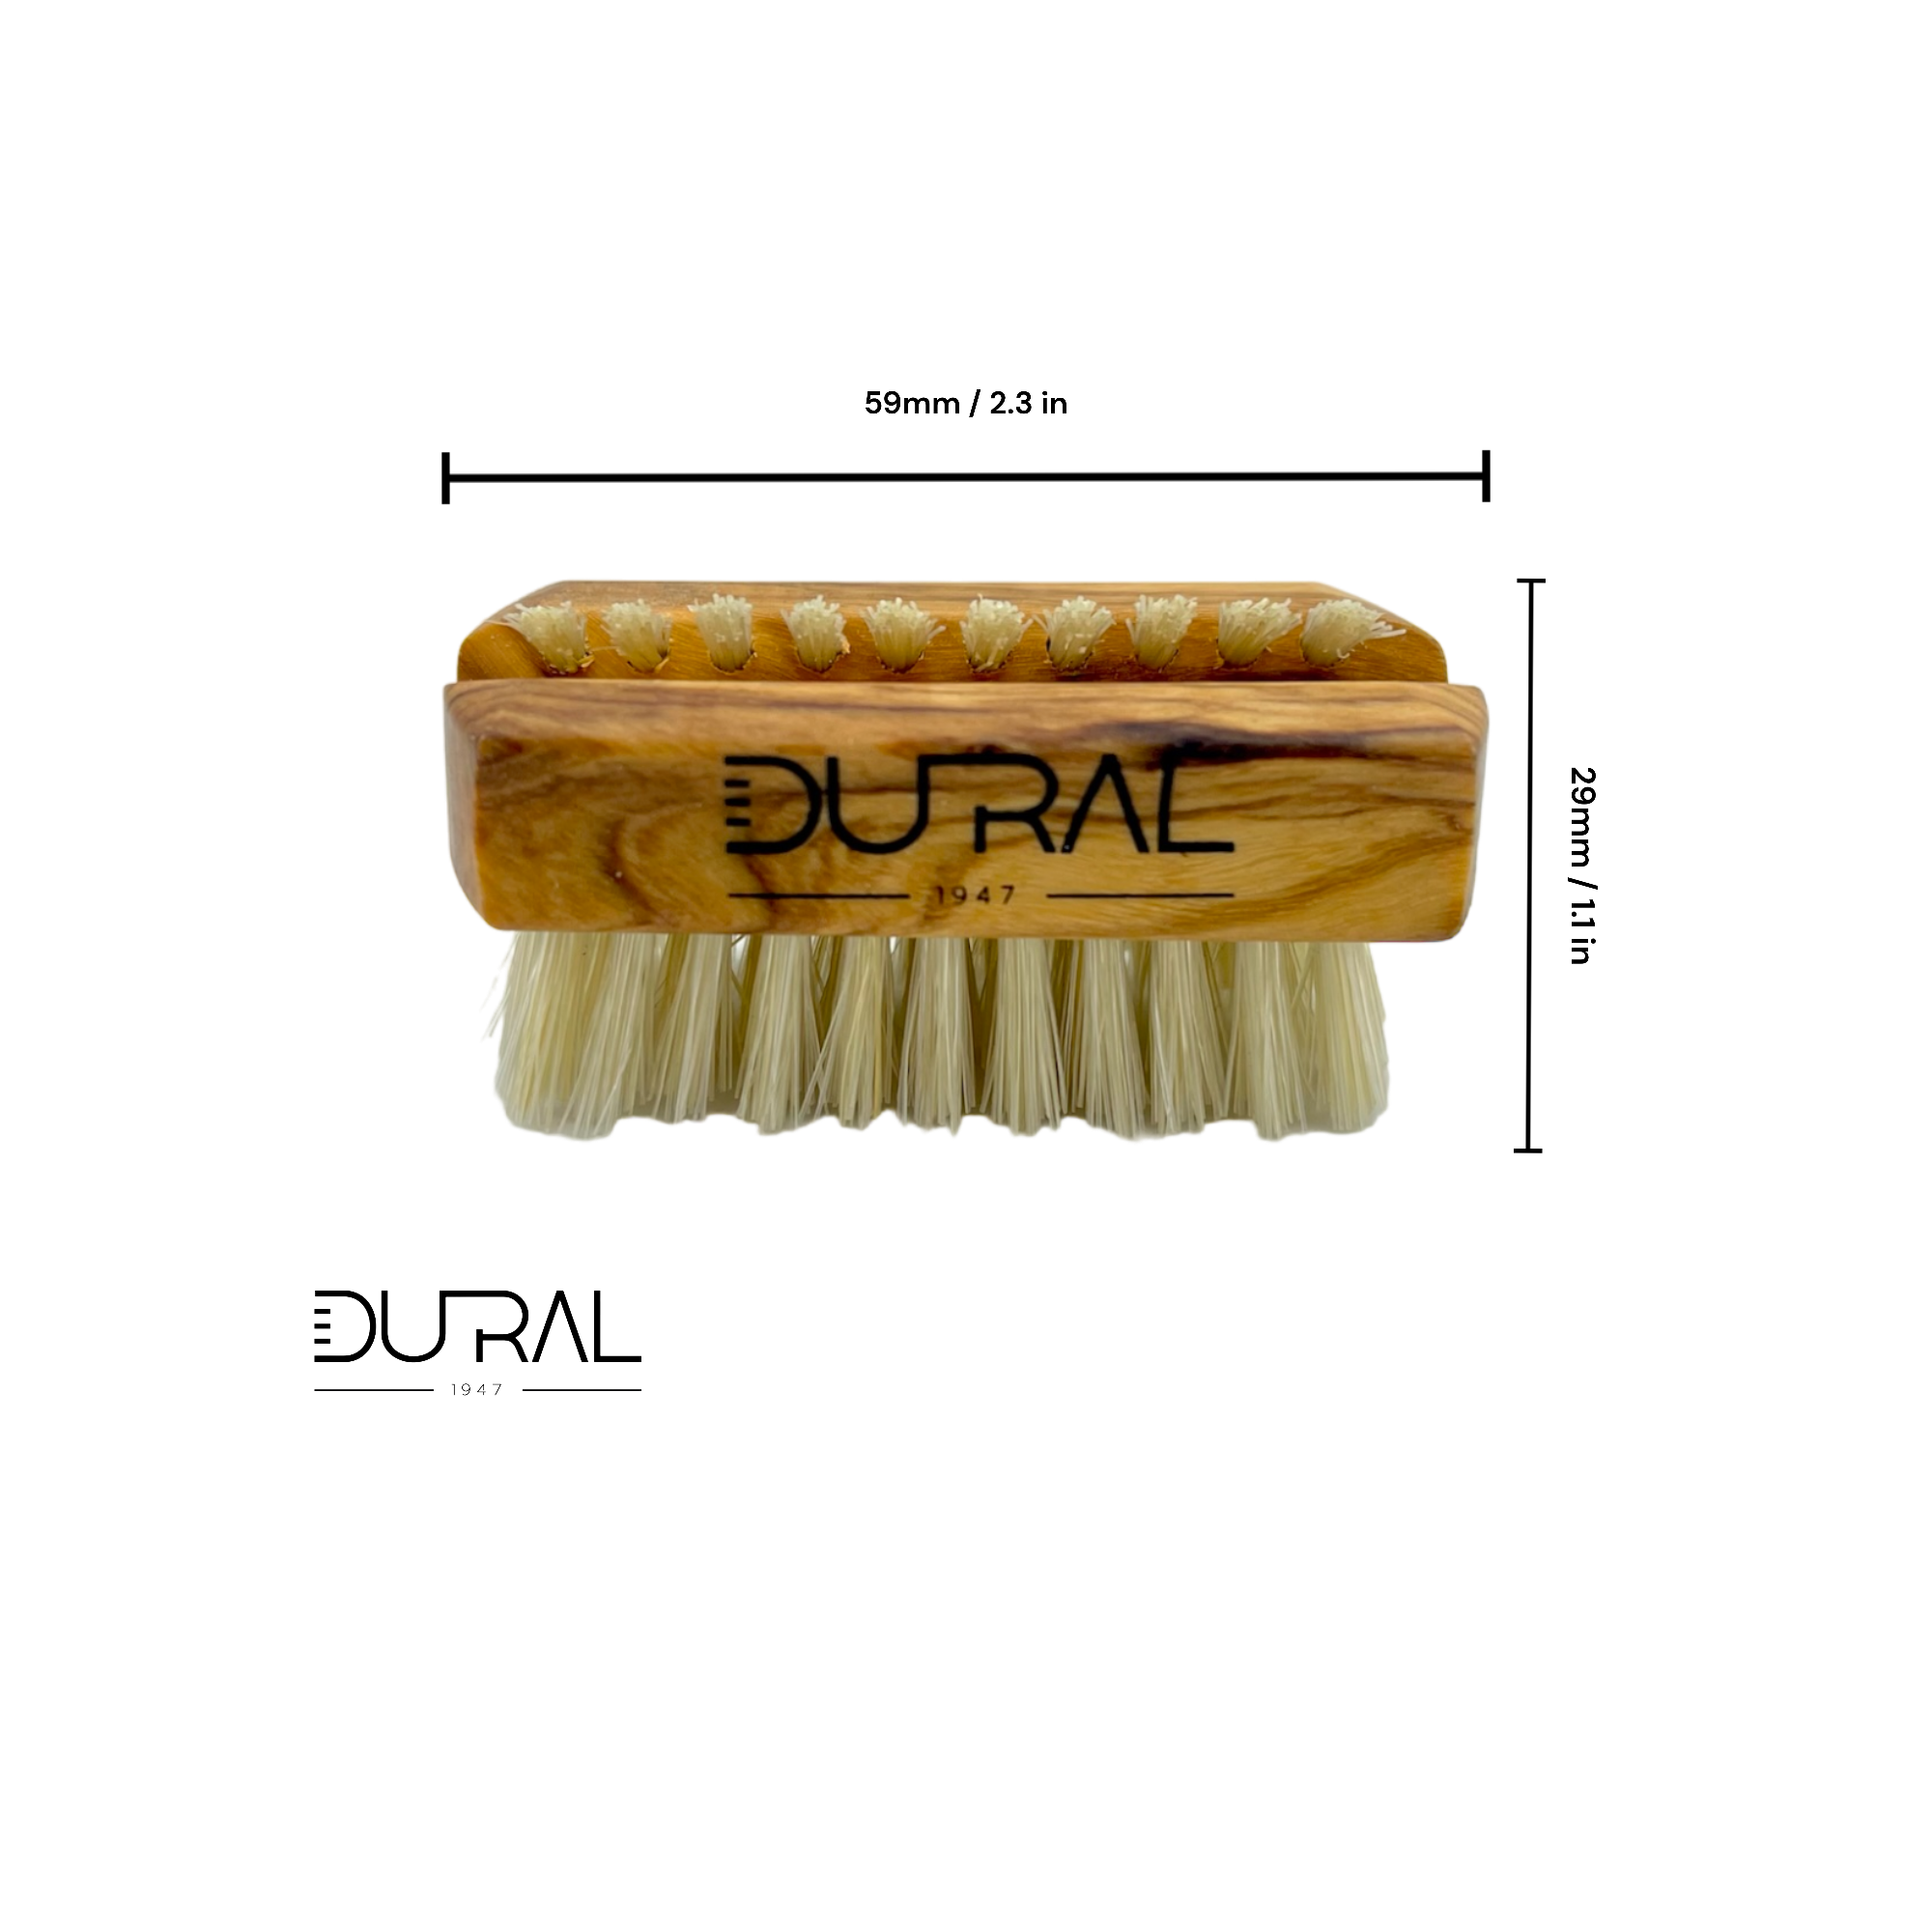 Dural Olive wood travel size nail brush with light natural bristles